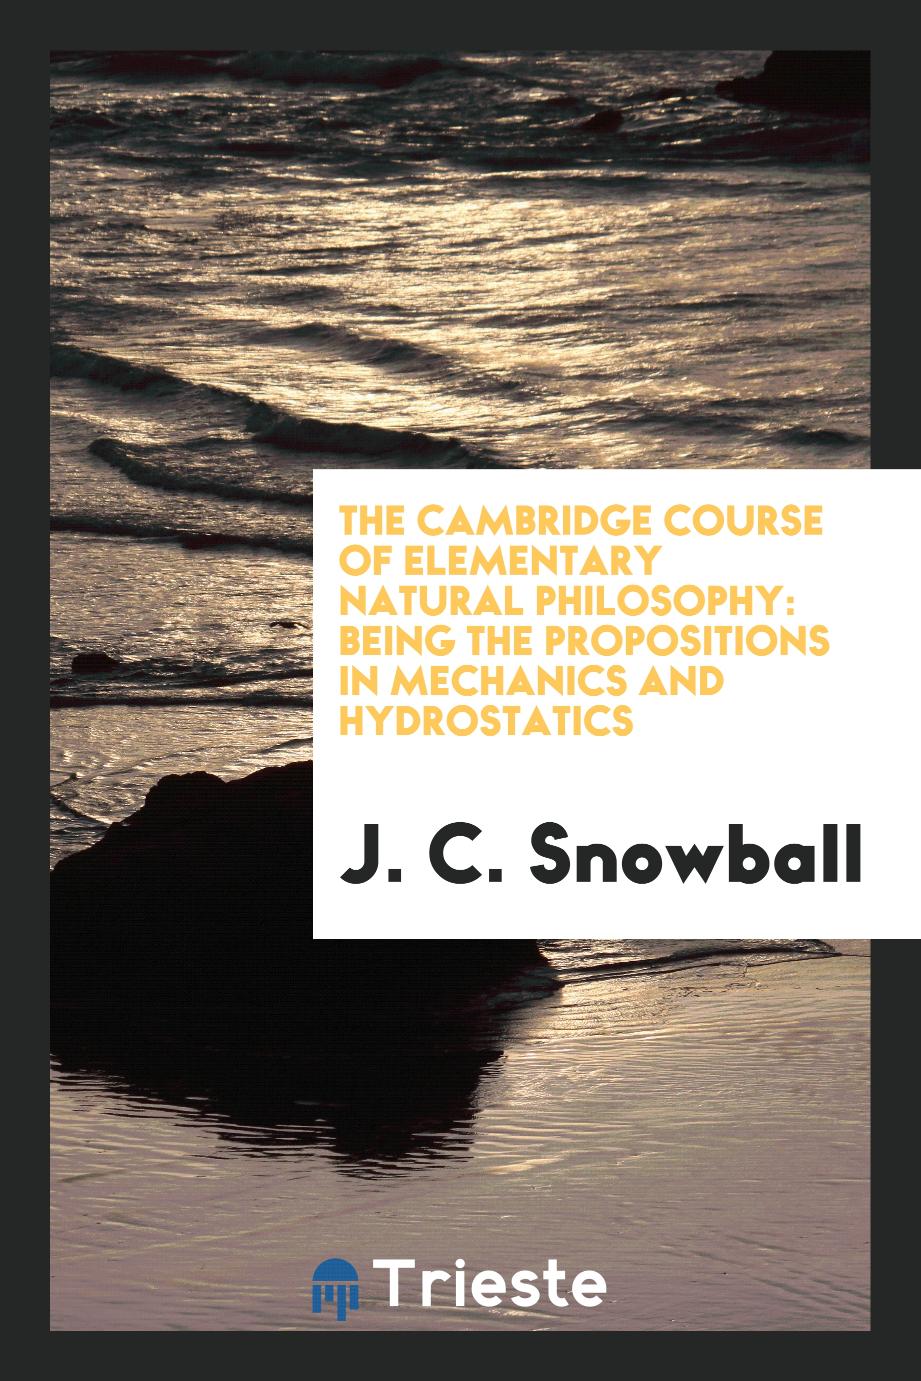 The Cambridge Course of Elementary Natural Philosophy: Being the Propositions in Mechanics and Hydrostatics